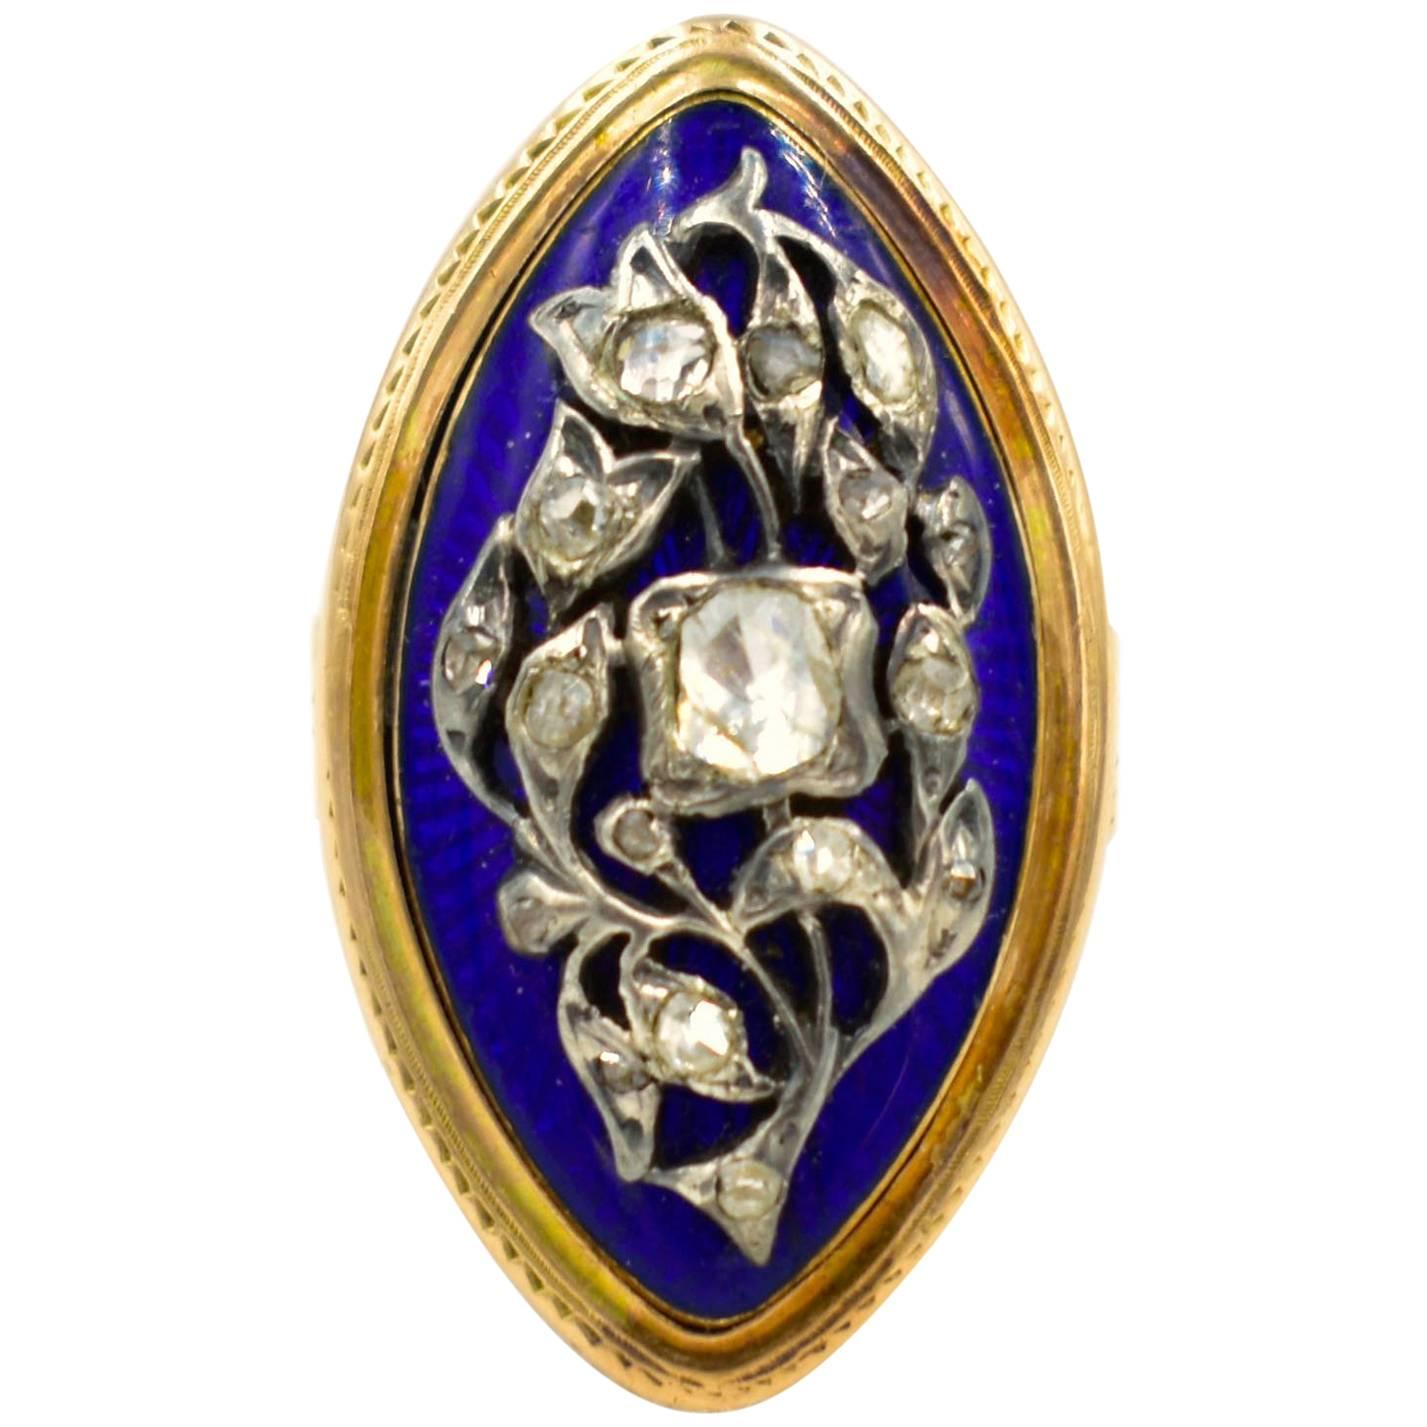 Antique Marquise Shaped Gold, Enamel and Diamond Ring